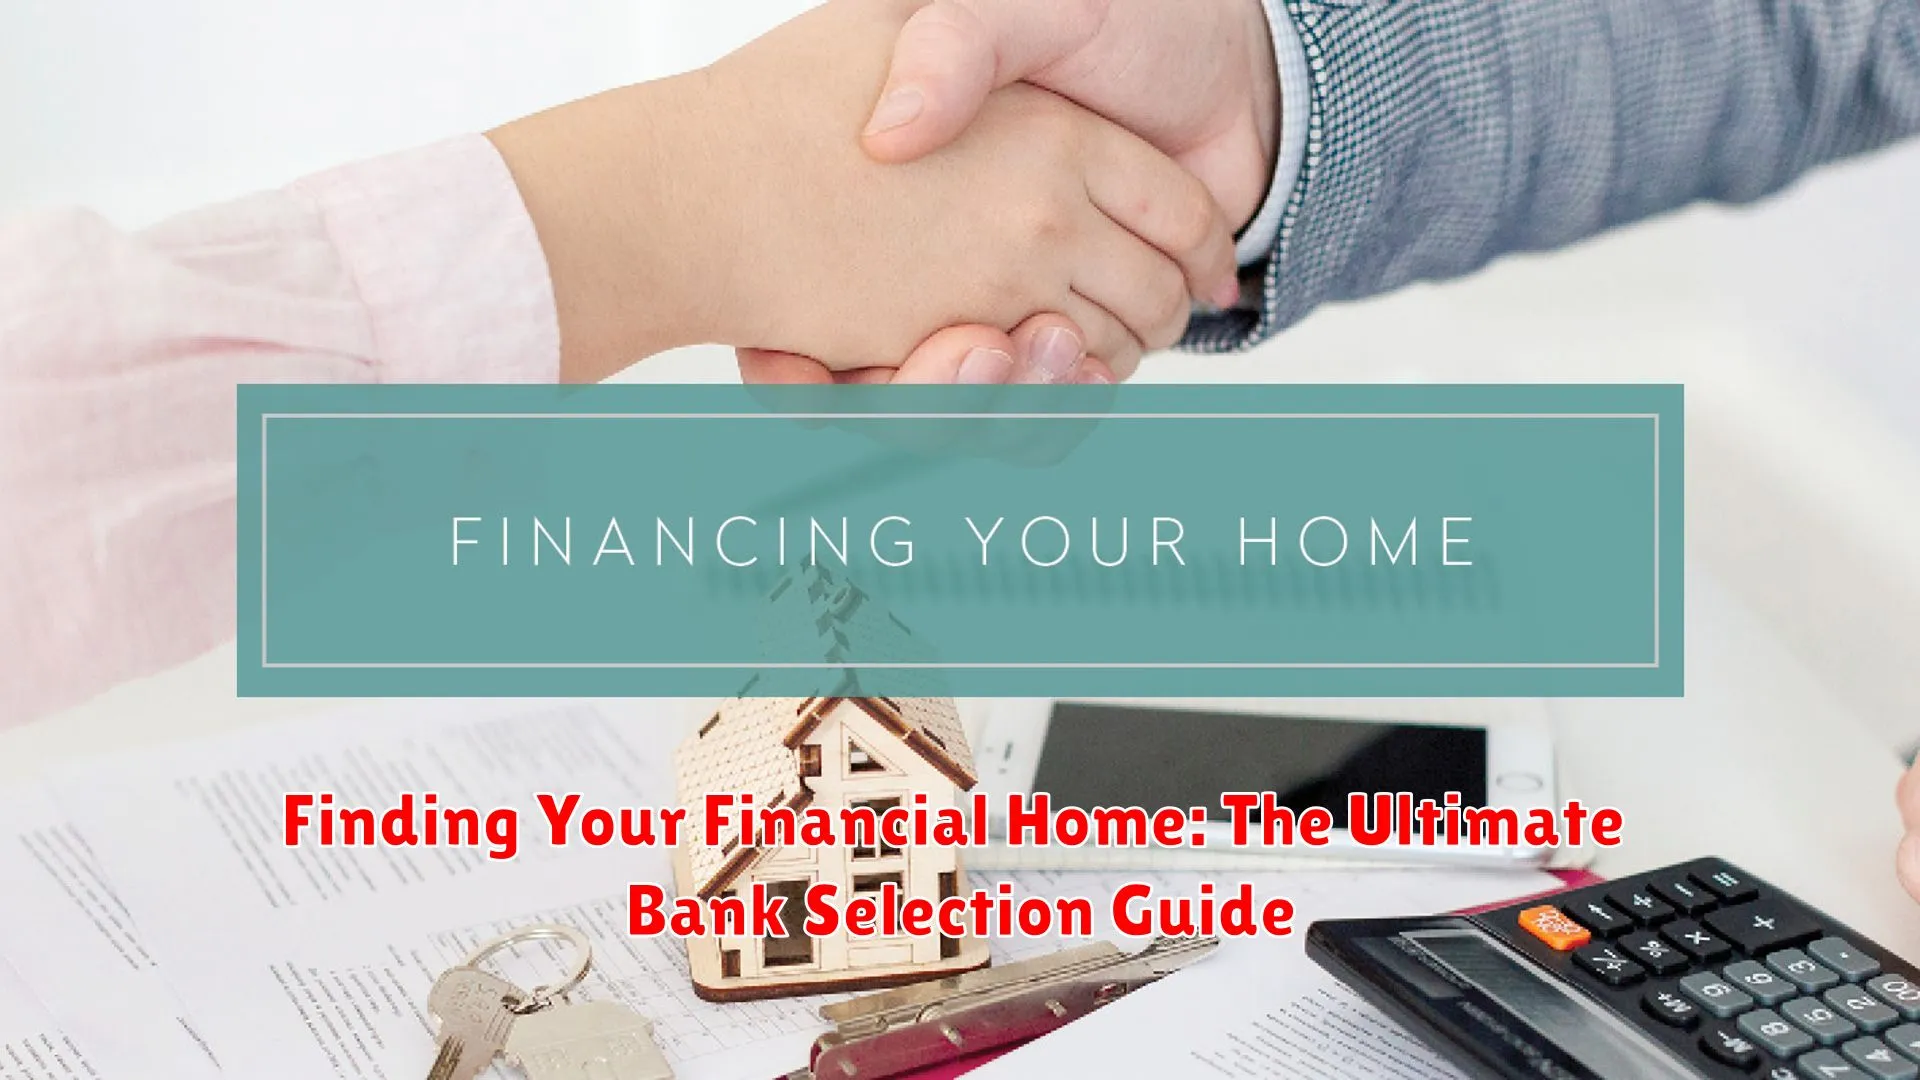 Finding Your Financial Home: The Ultimate Bank Selection Guide